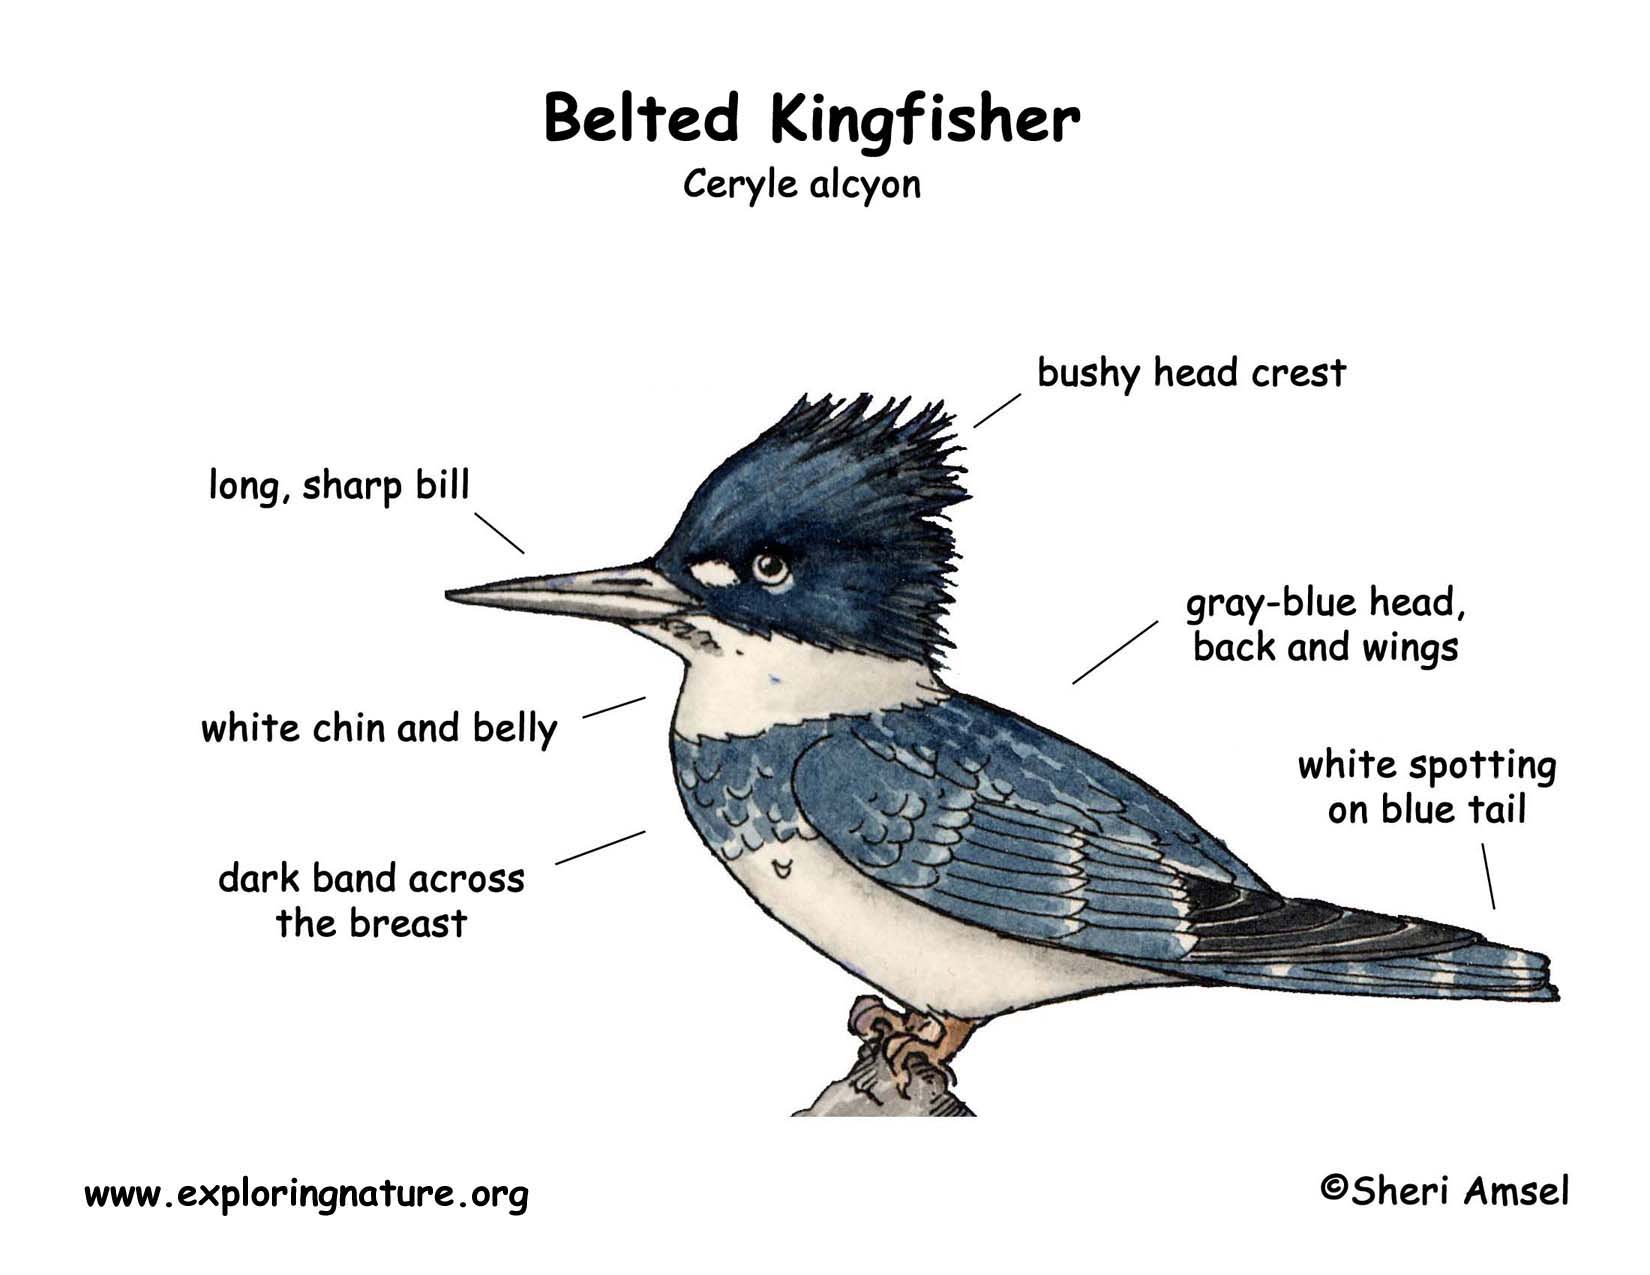 Kingfisher (Belted)